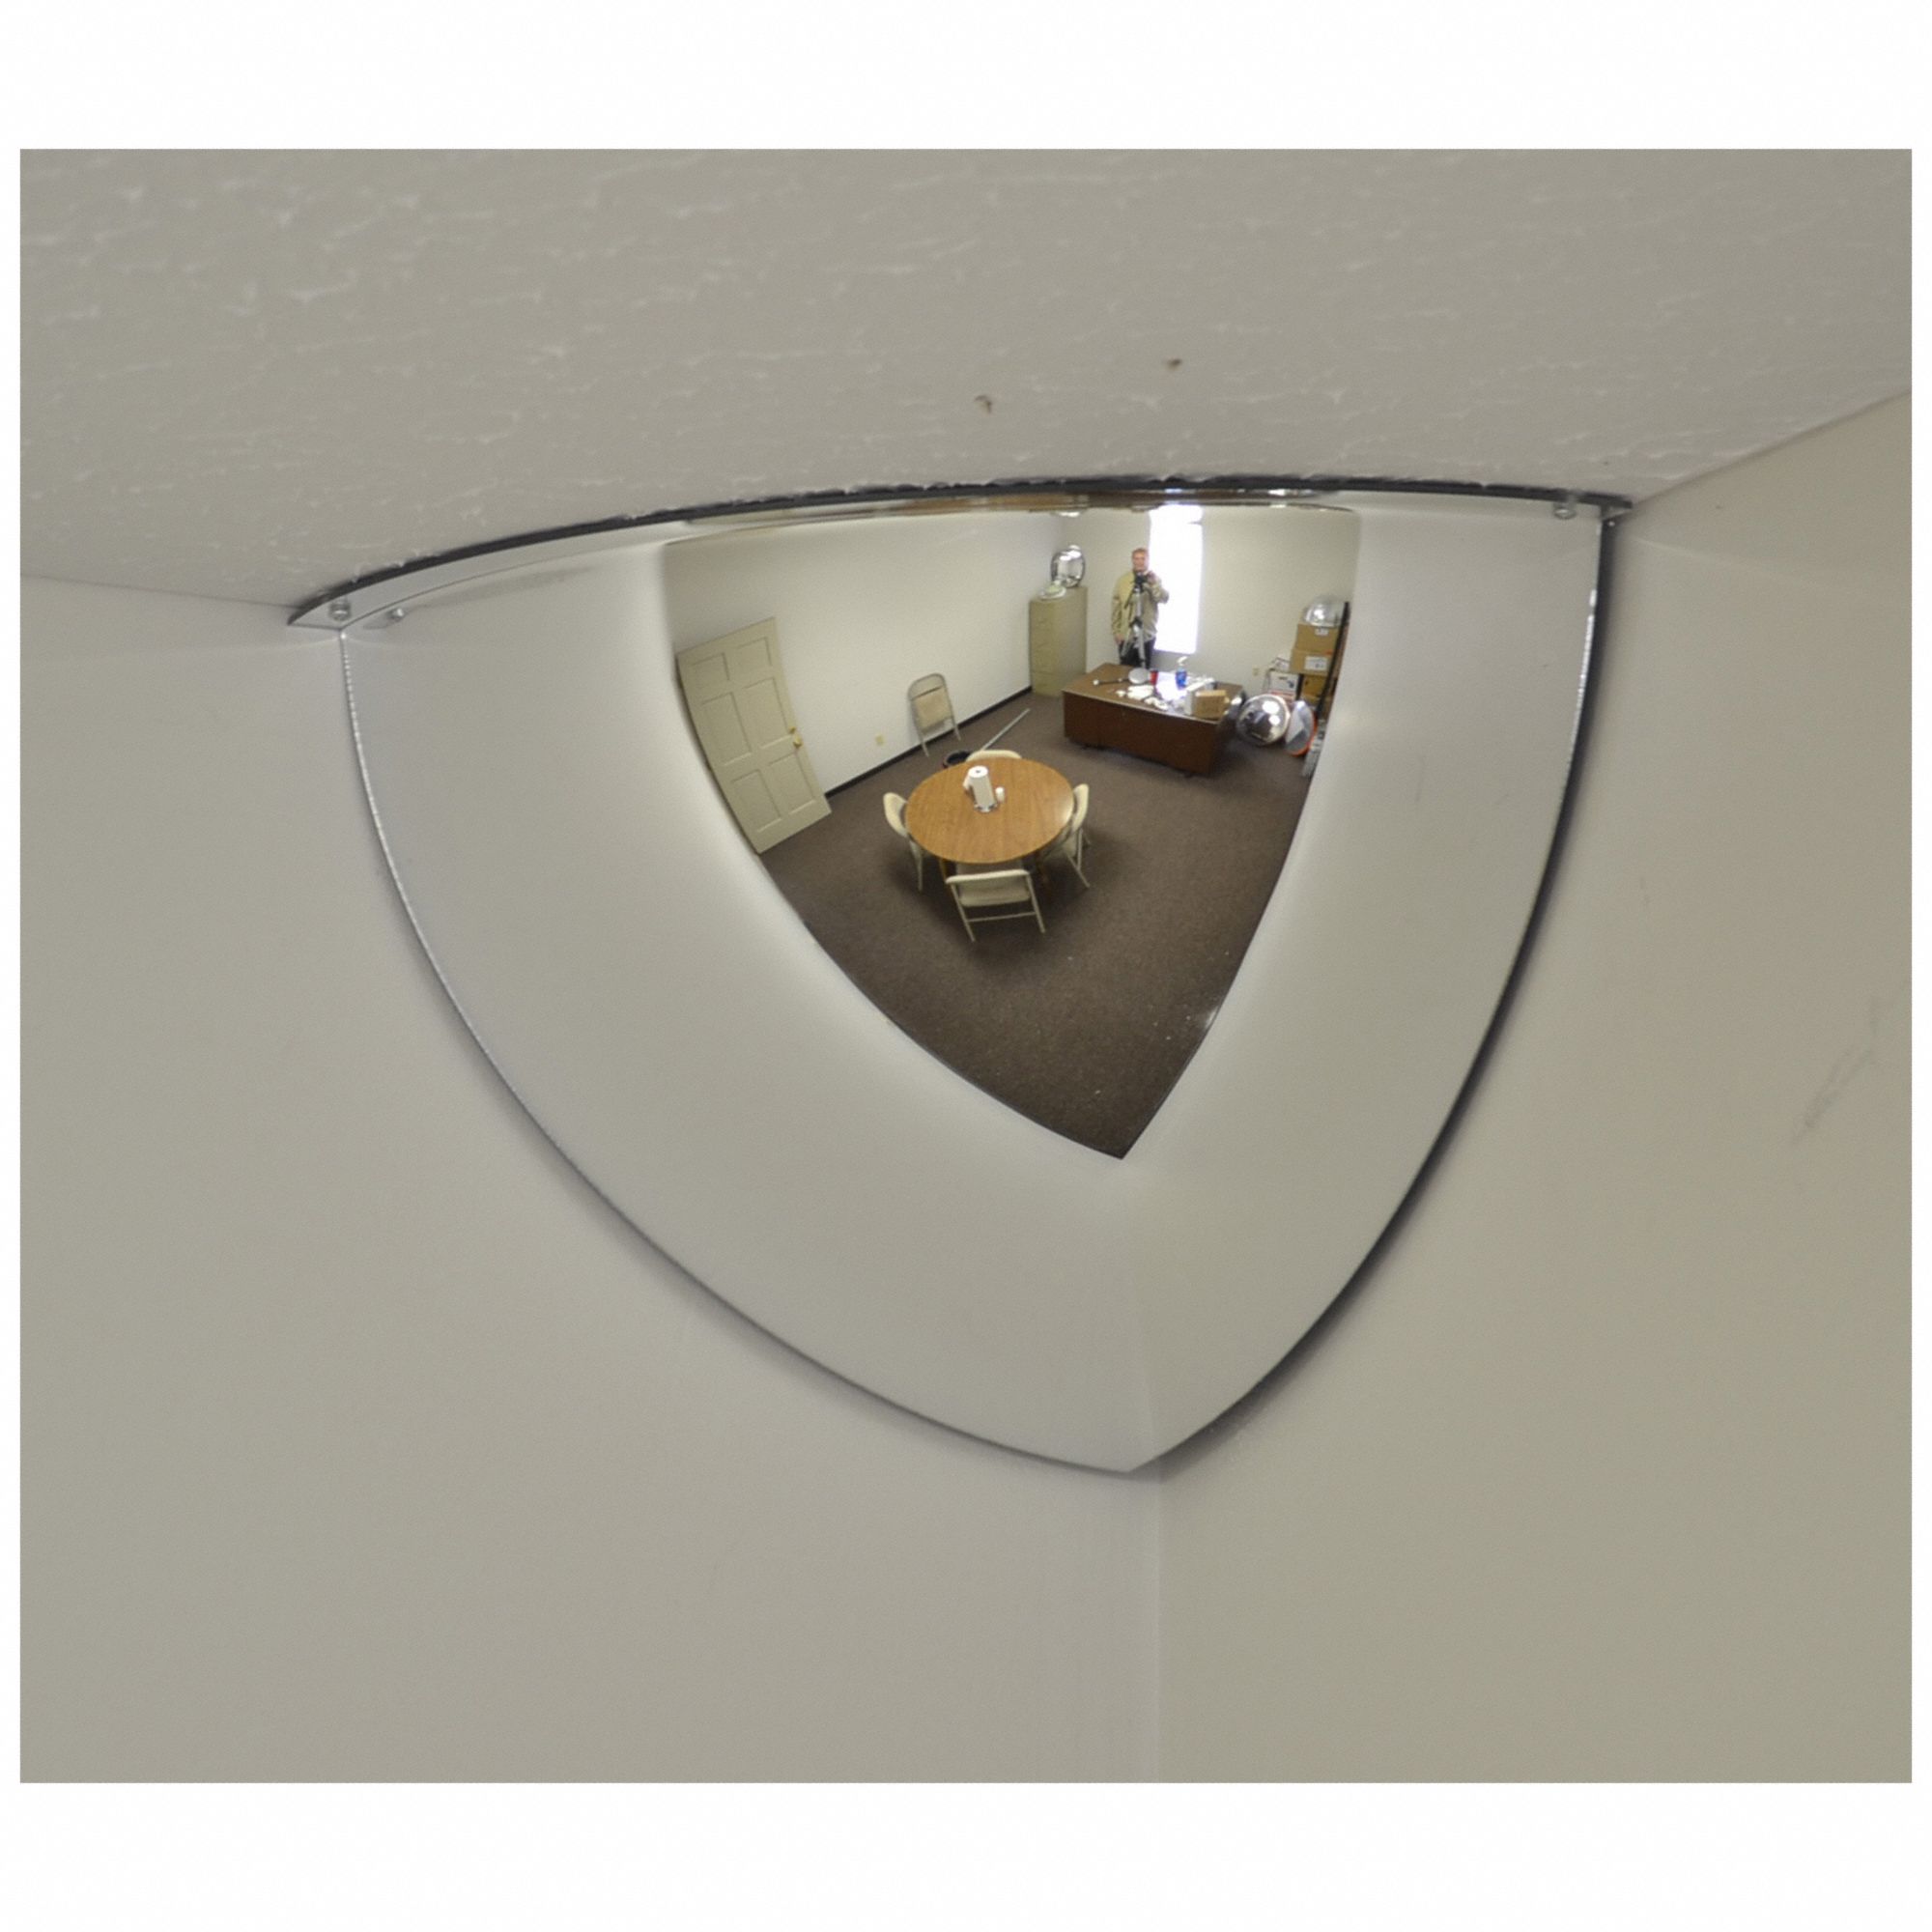 Polycarbonate, 36 in Dia, Quarter Dome Safety Mirror - 798A42